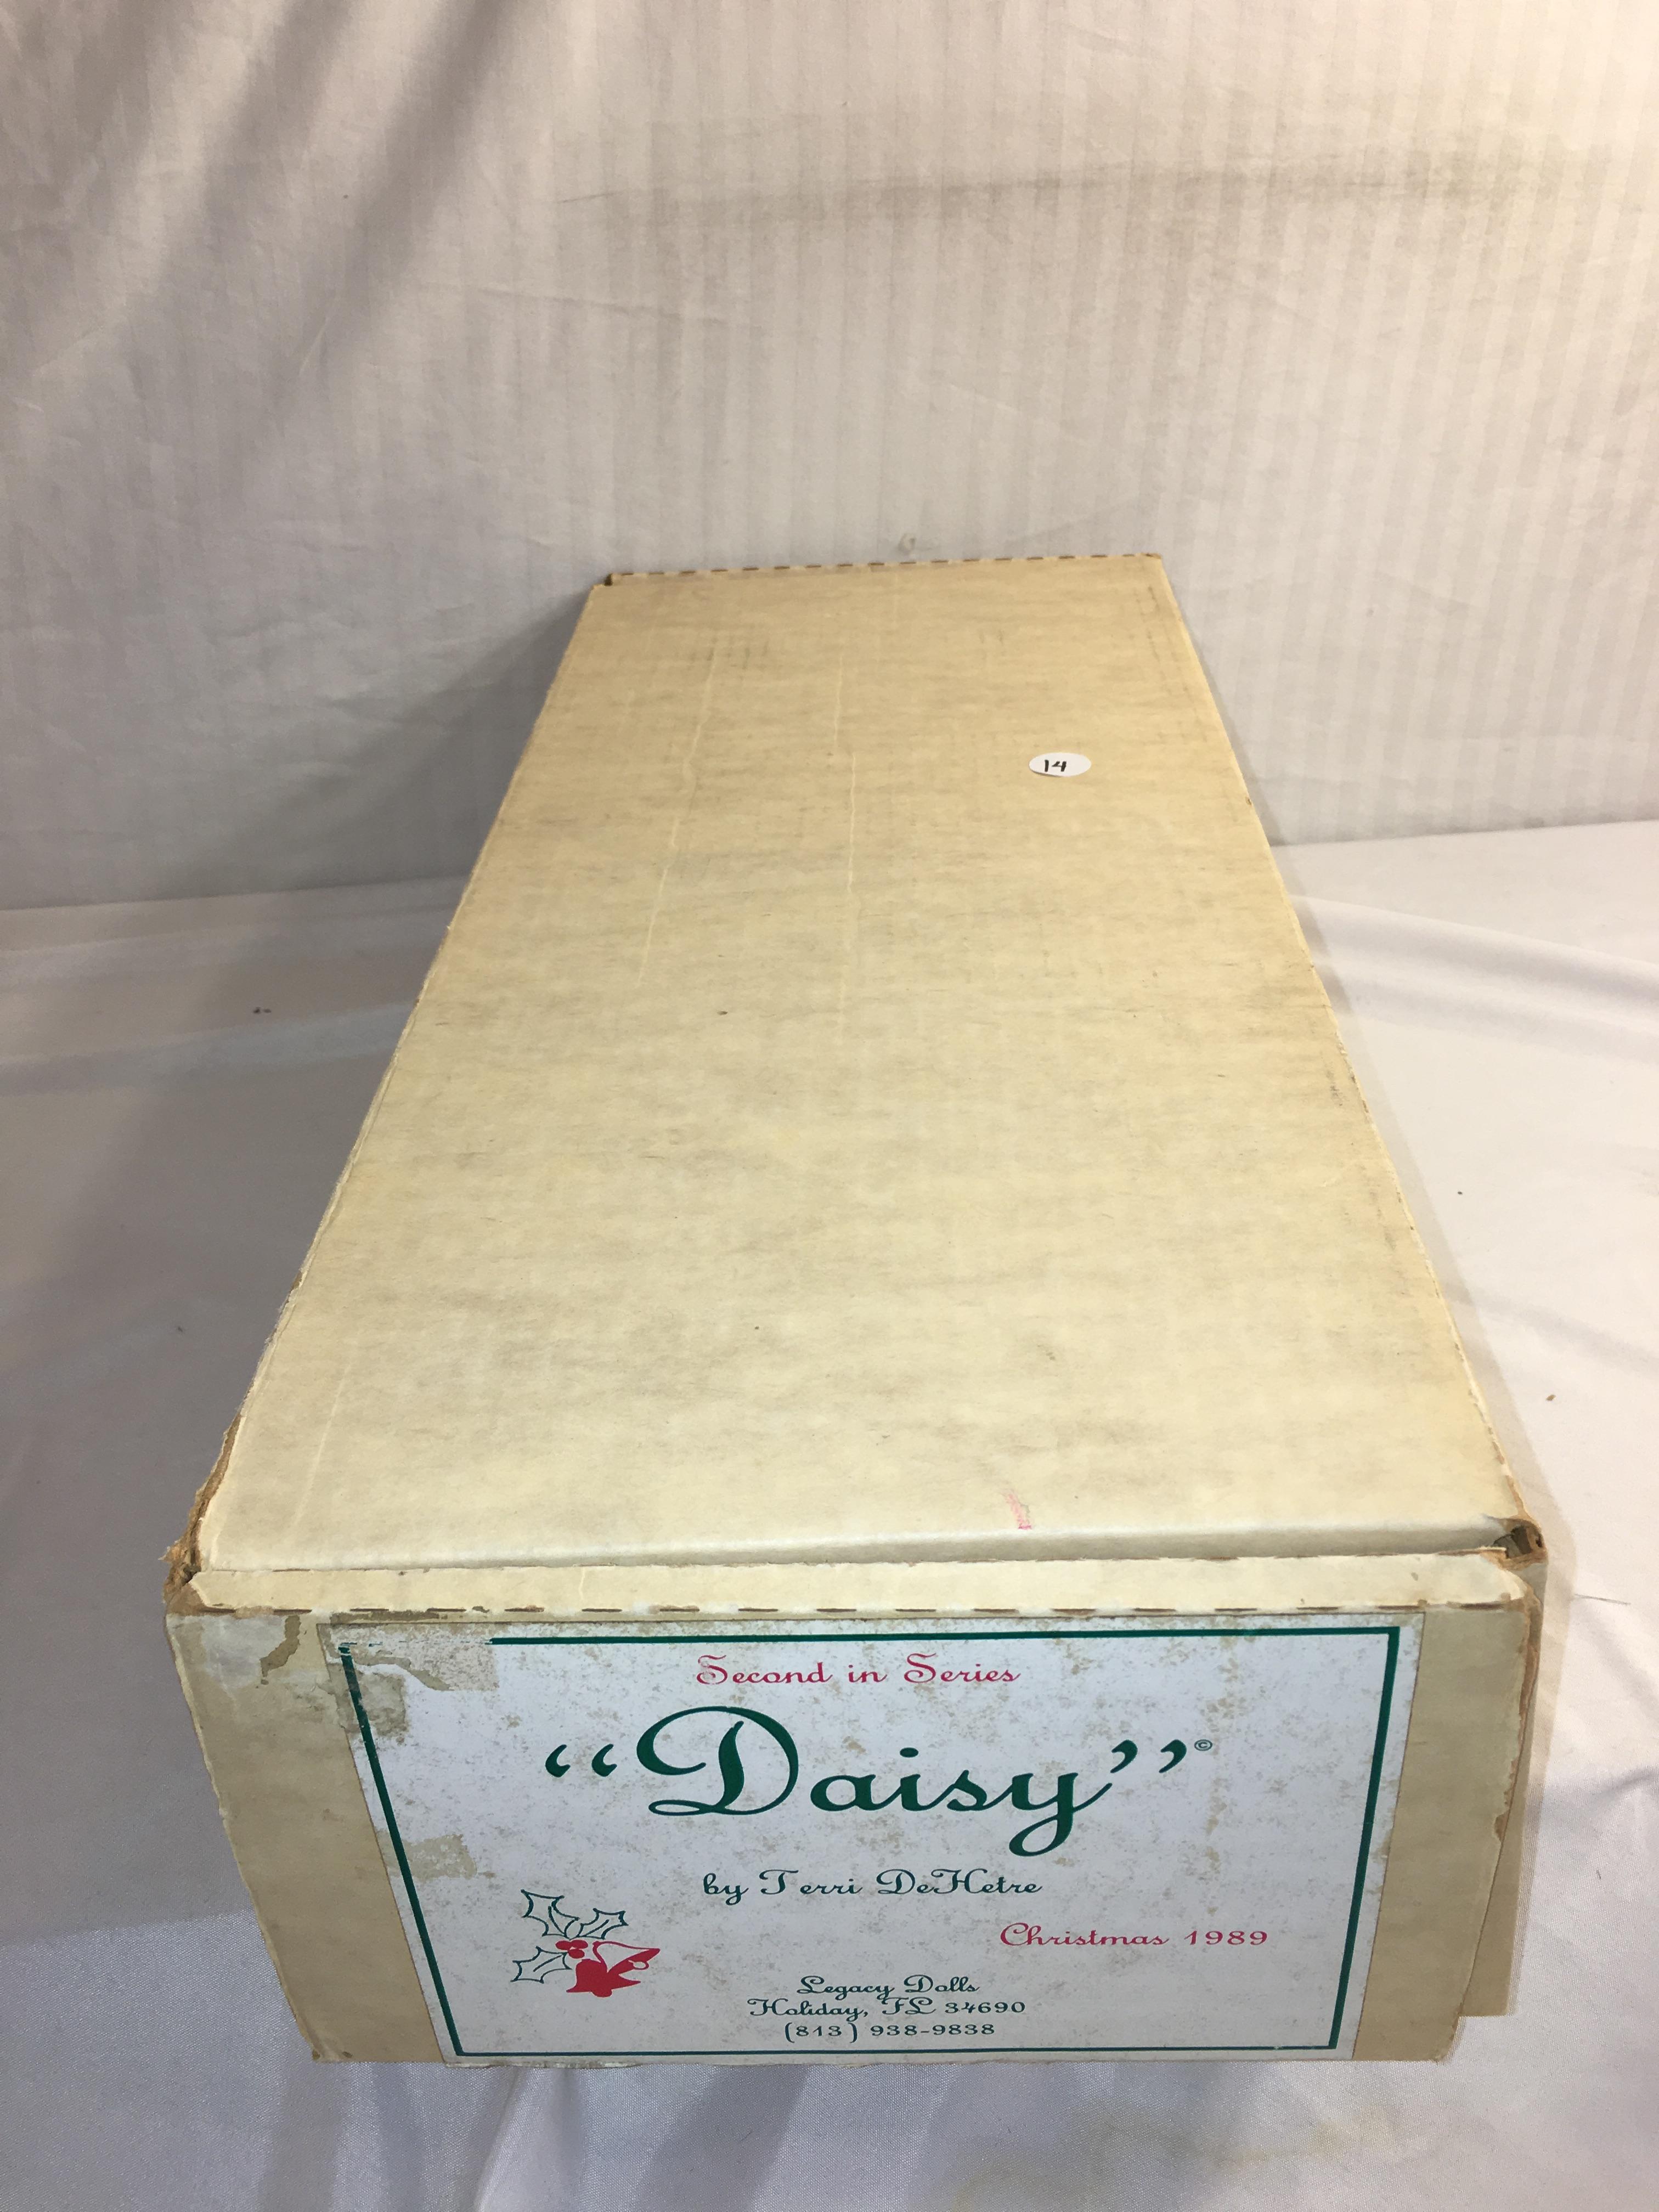 Collector Legacy Doll Vintage Christmas 1989 2nd in a Series "Daisy" By Terri De Hetre 21.5"T